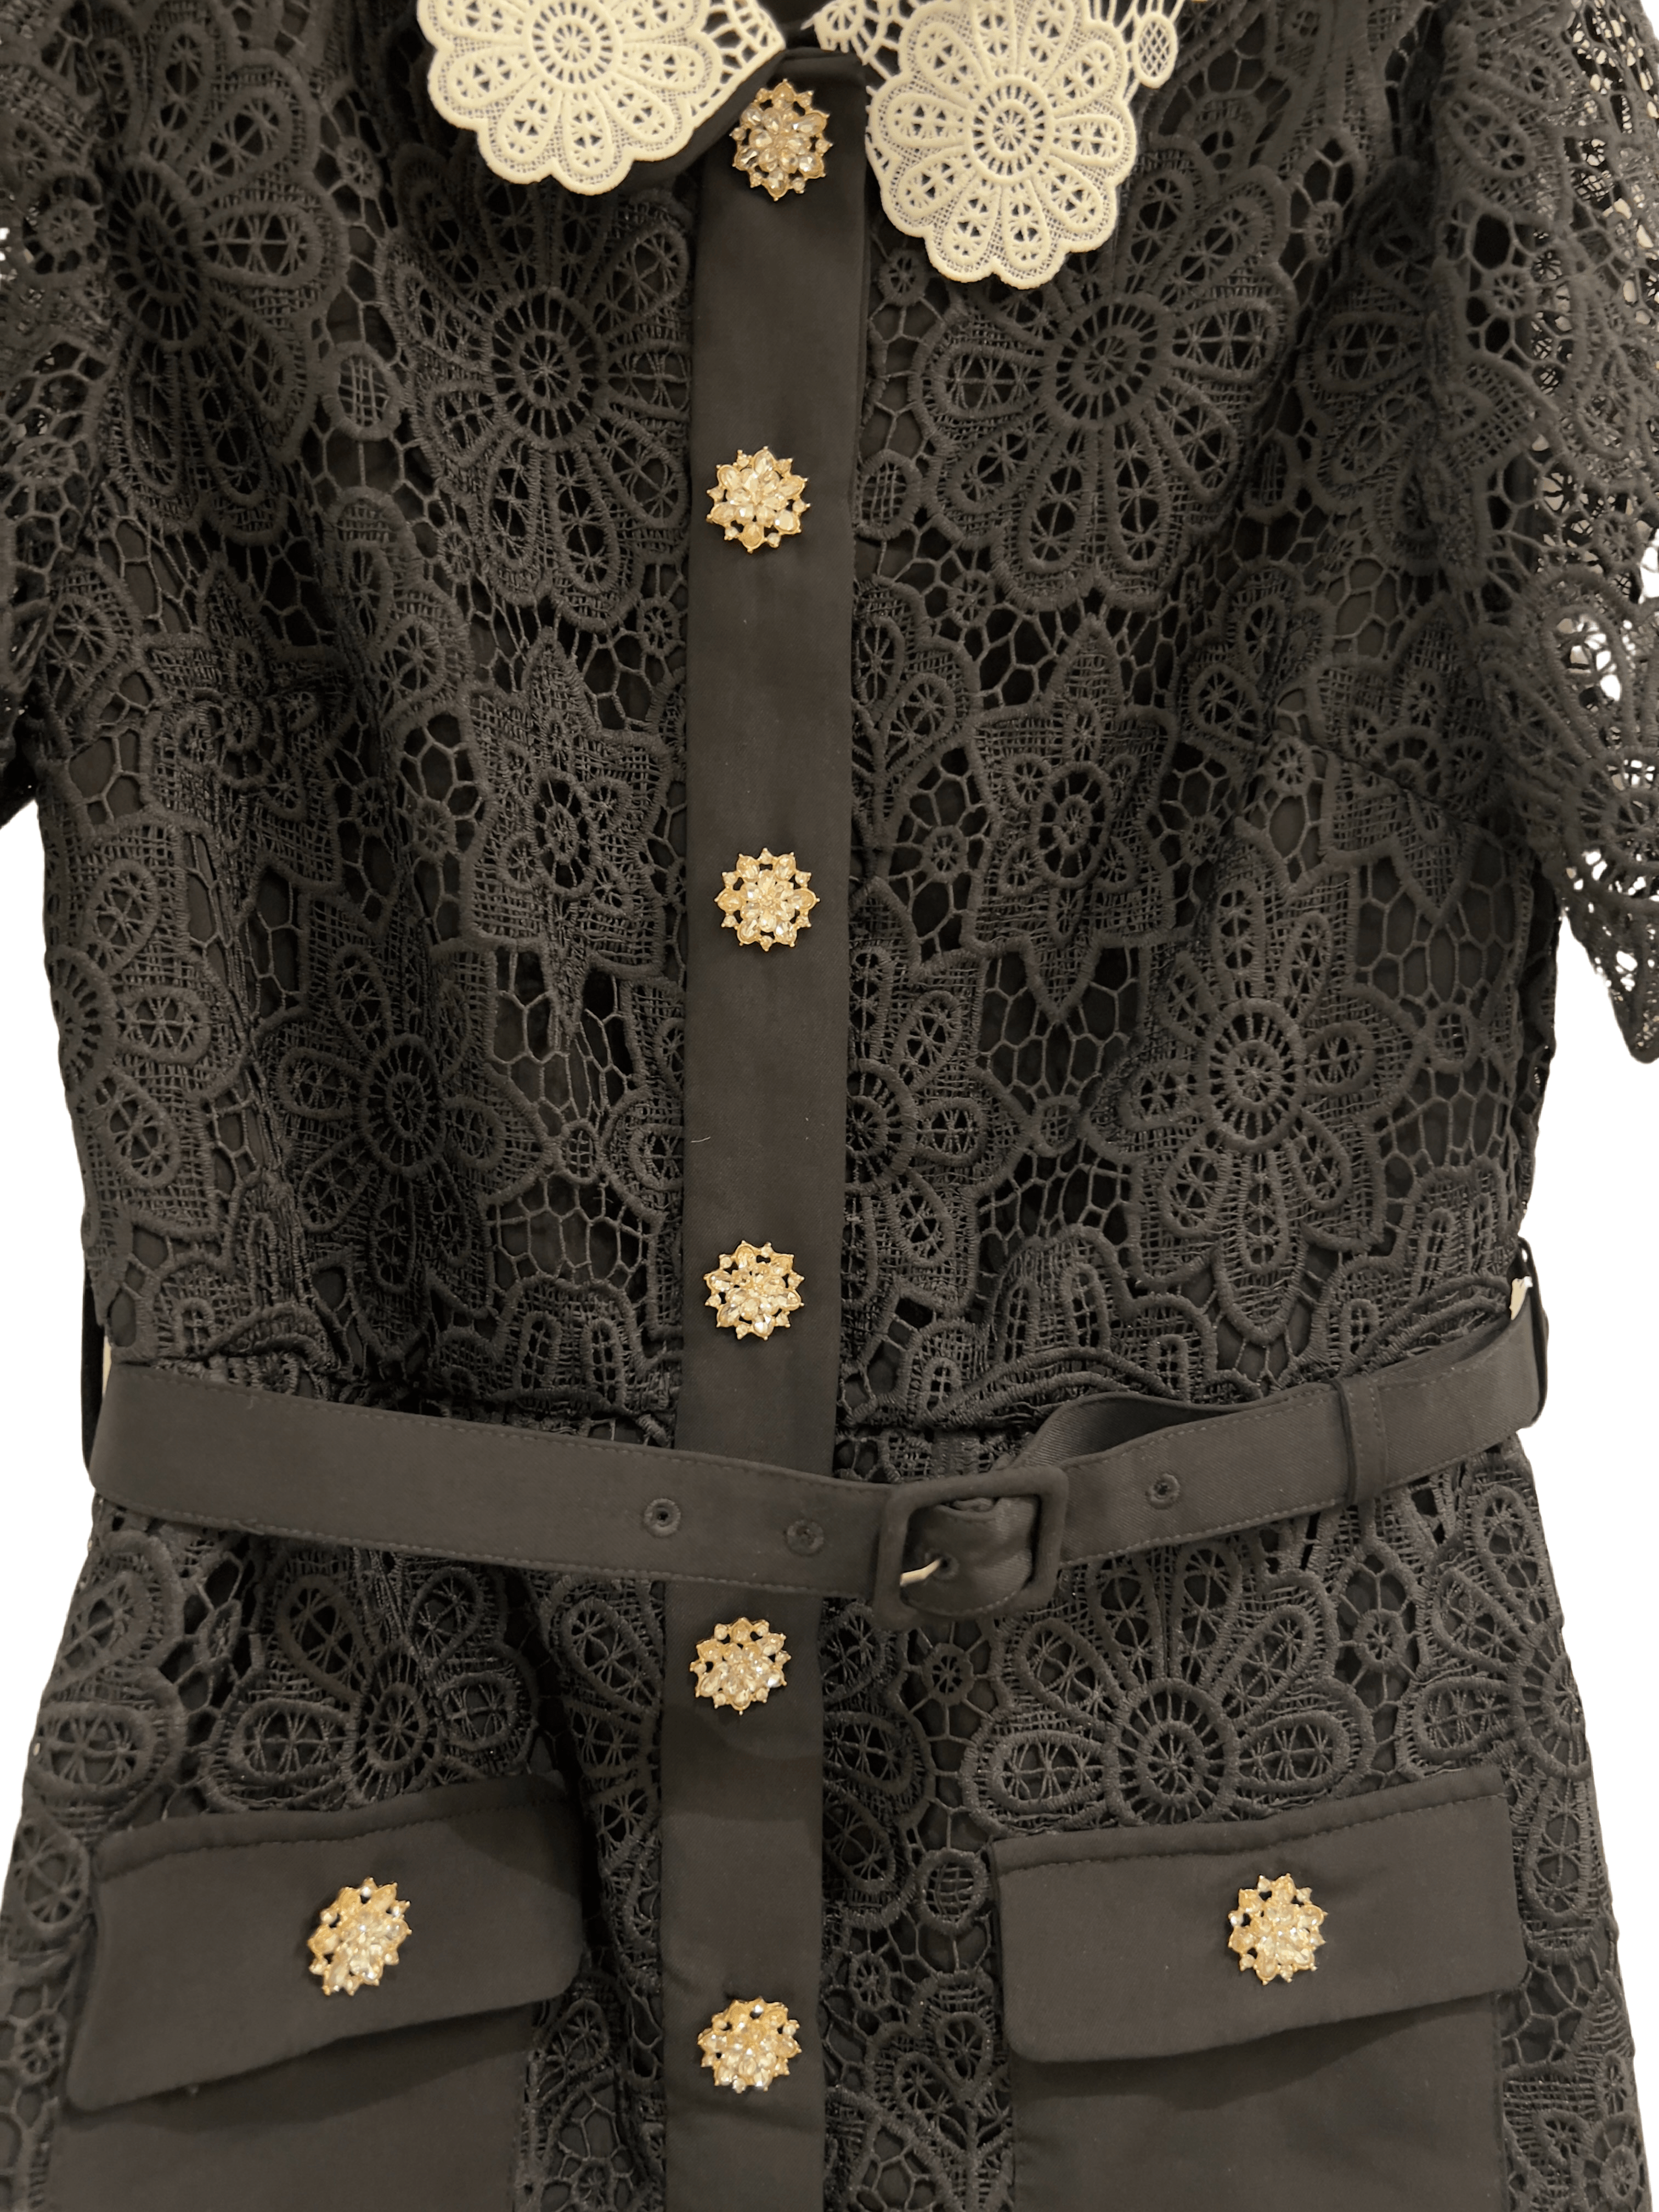 Elegant black lace dress with a distinctive white lace collar, short lace sleeves, and a row of decorative buttons down the front, displayed on a hanger - BTK COLLECTION